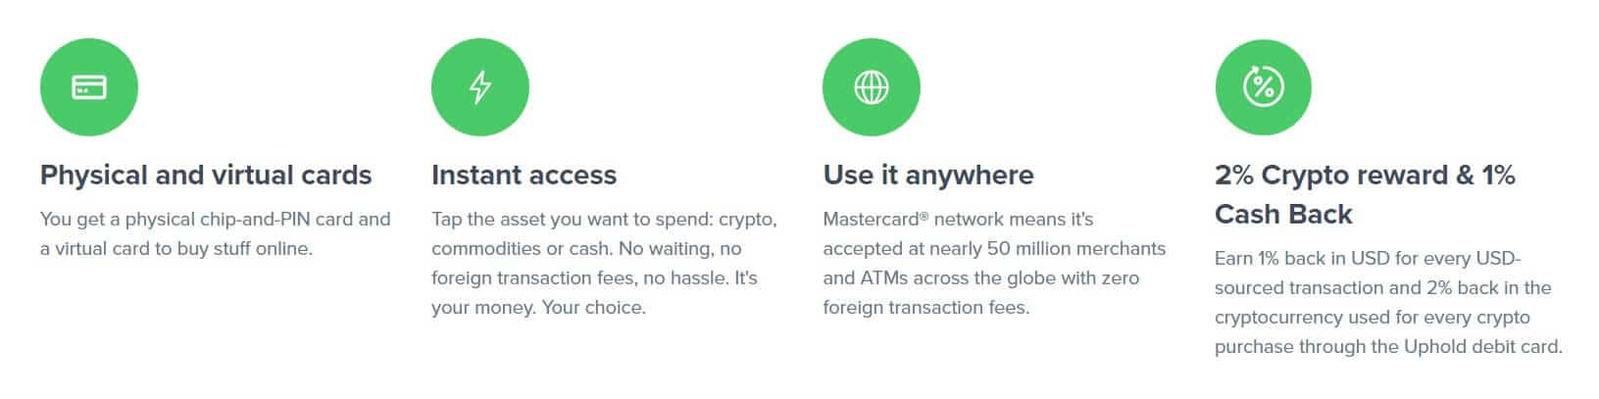 Uphold Debit Card Features